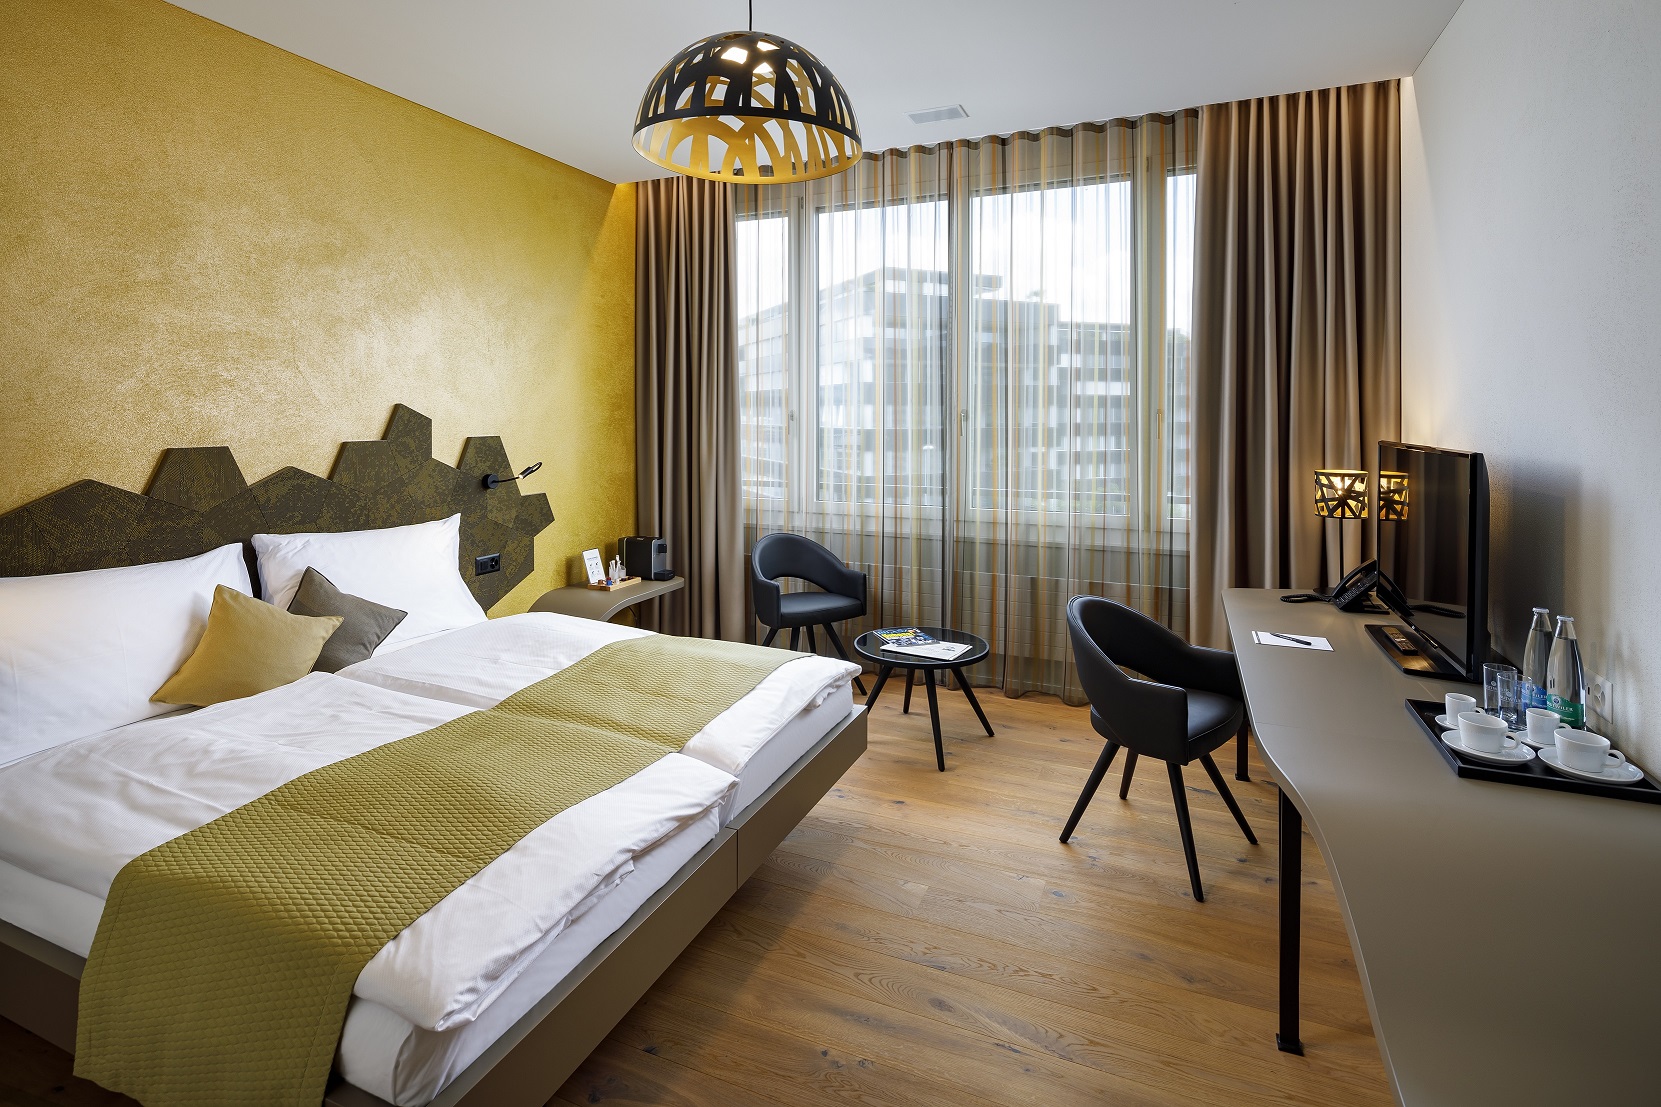 Our new hotel additions - FOCUS Hotel, Sursee (LU) The new 4* hotel is ideally located close to the historic old town and is t